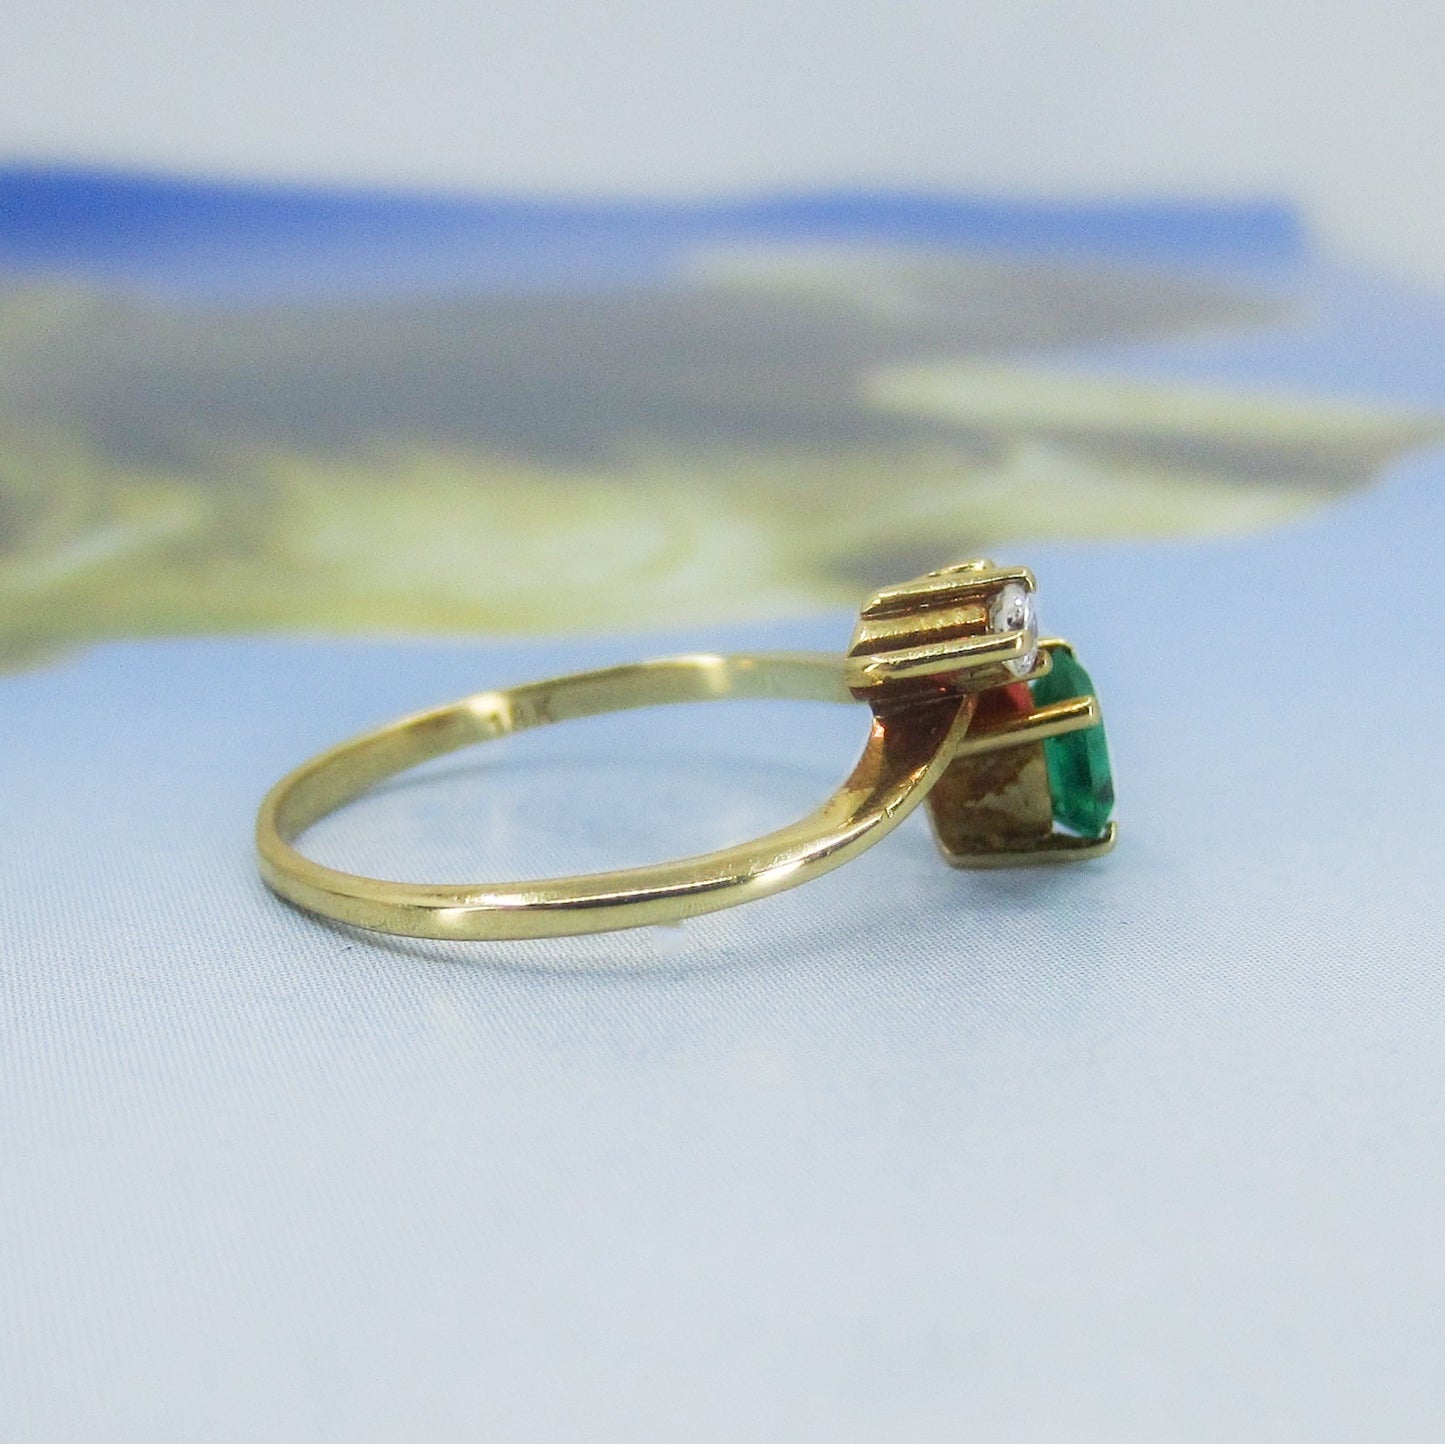 SOLD--Vintage/Estate Emerald and Diamond Ring 18k